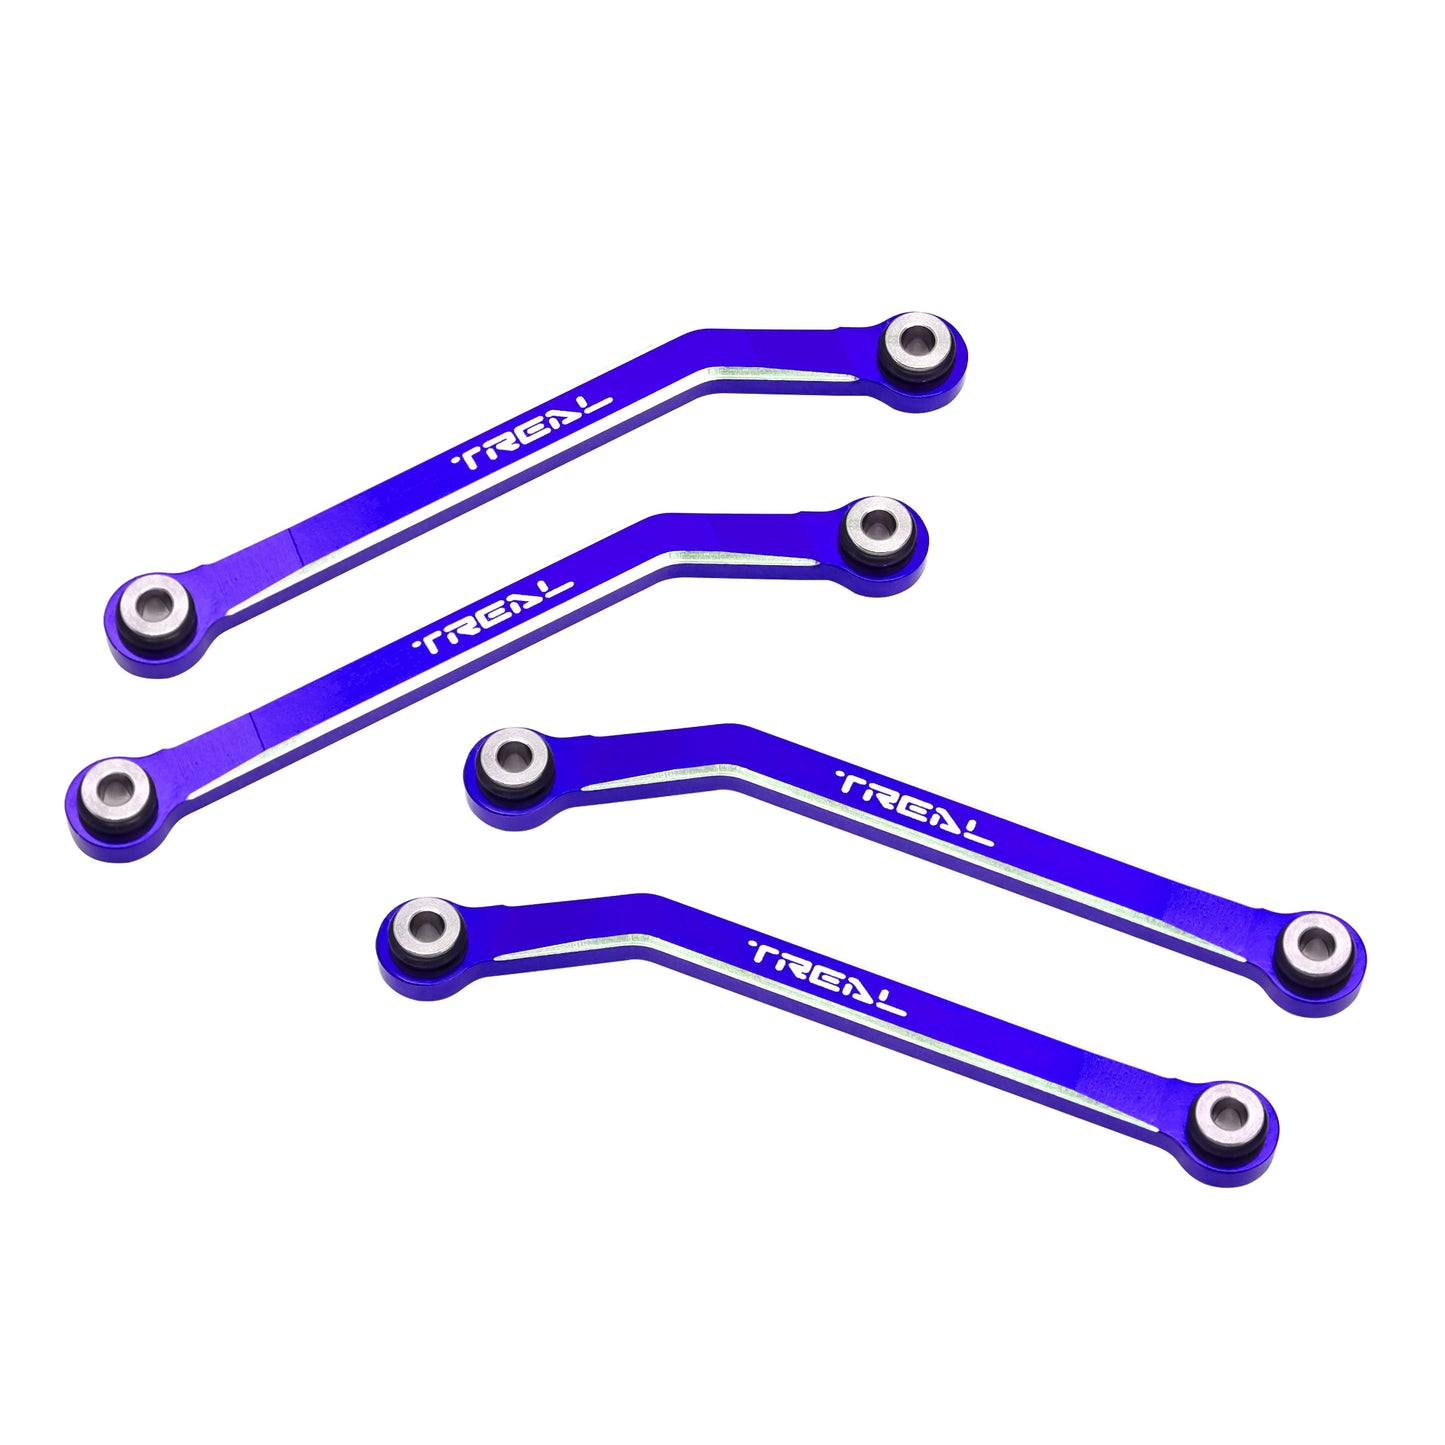 TREAL FCX24 High Clearance Links, Aluminum 7075 Chassis Lower Linkages (4p) for 1/24 FMS FCX24